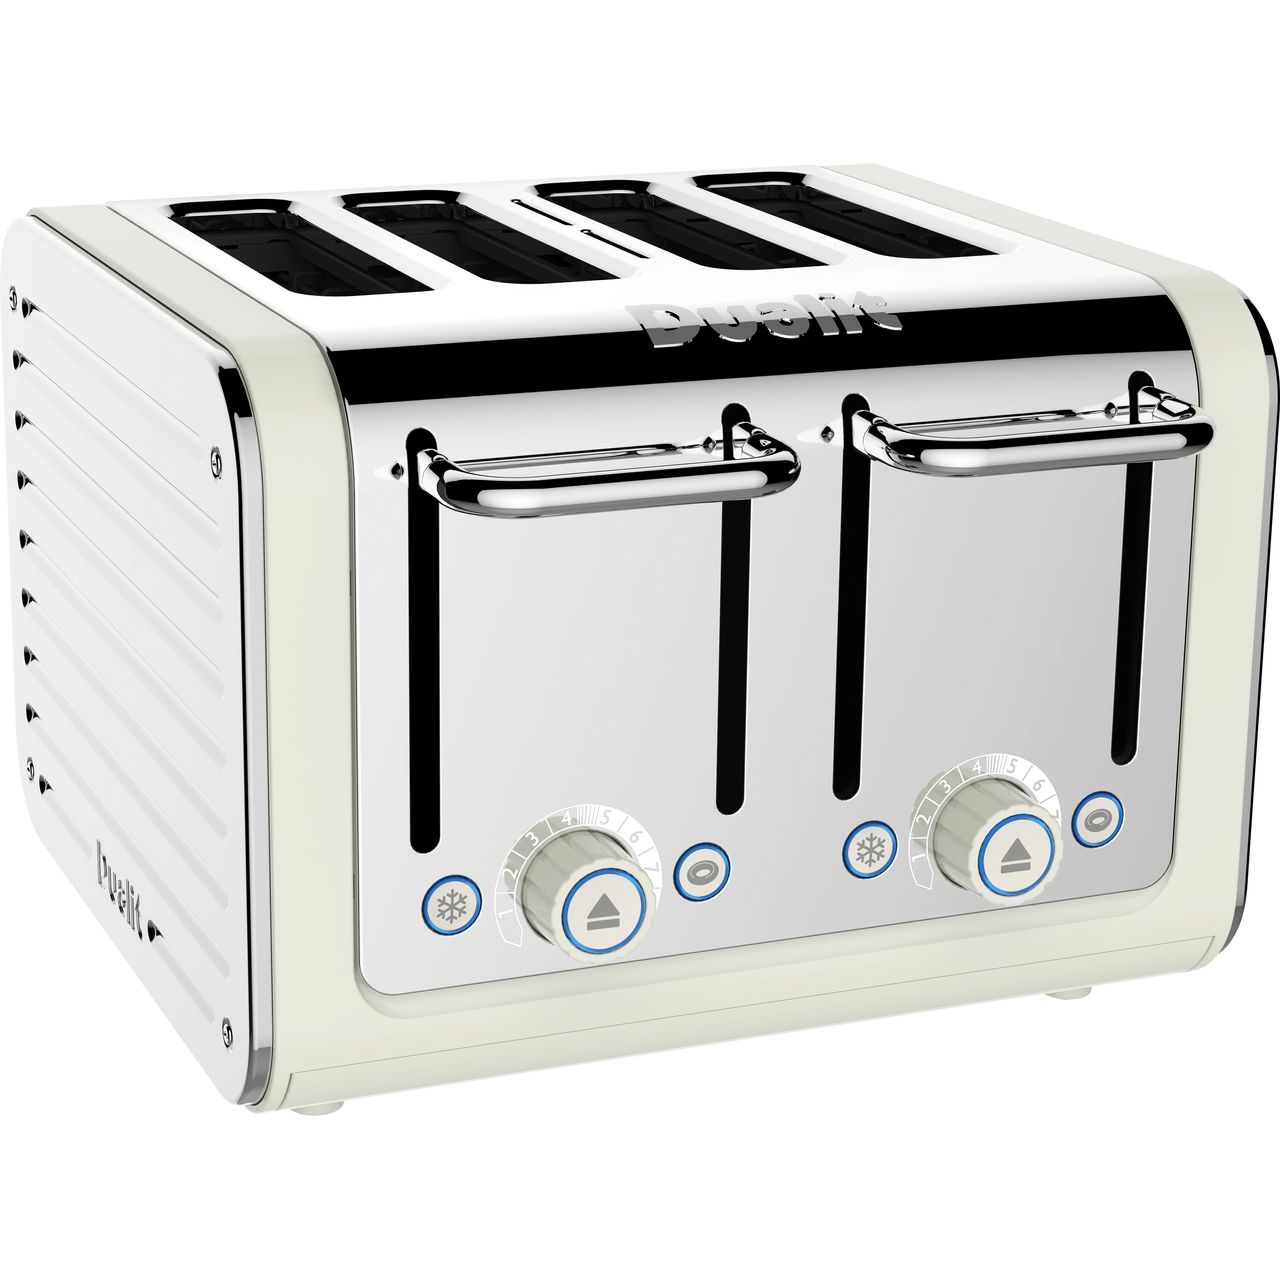 Dualit Architect 46523 4 Slice Toaster Review